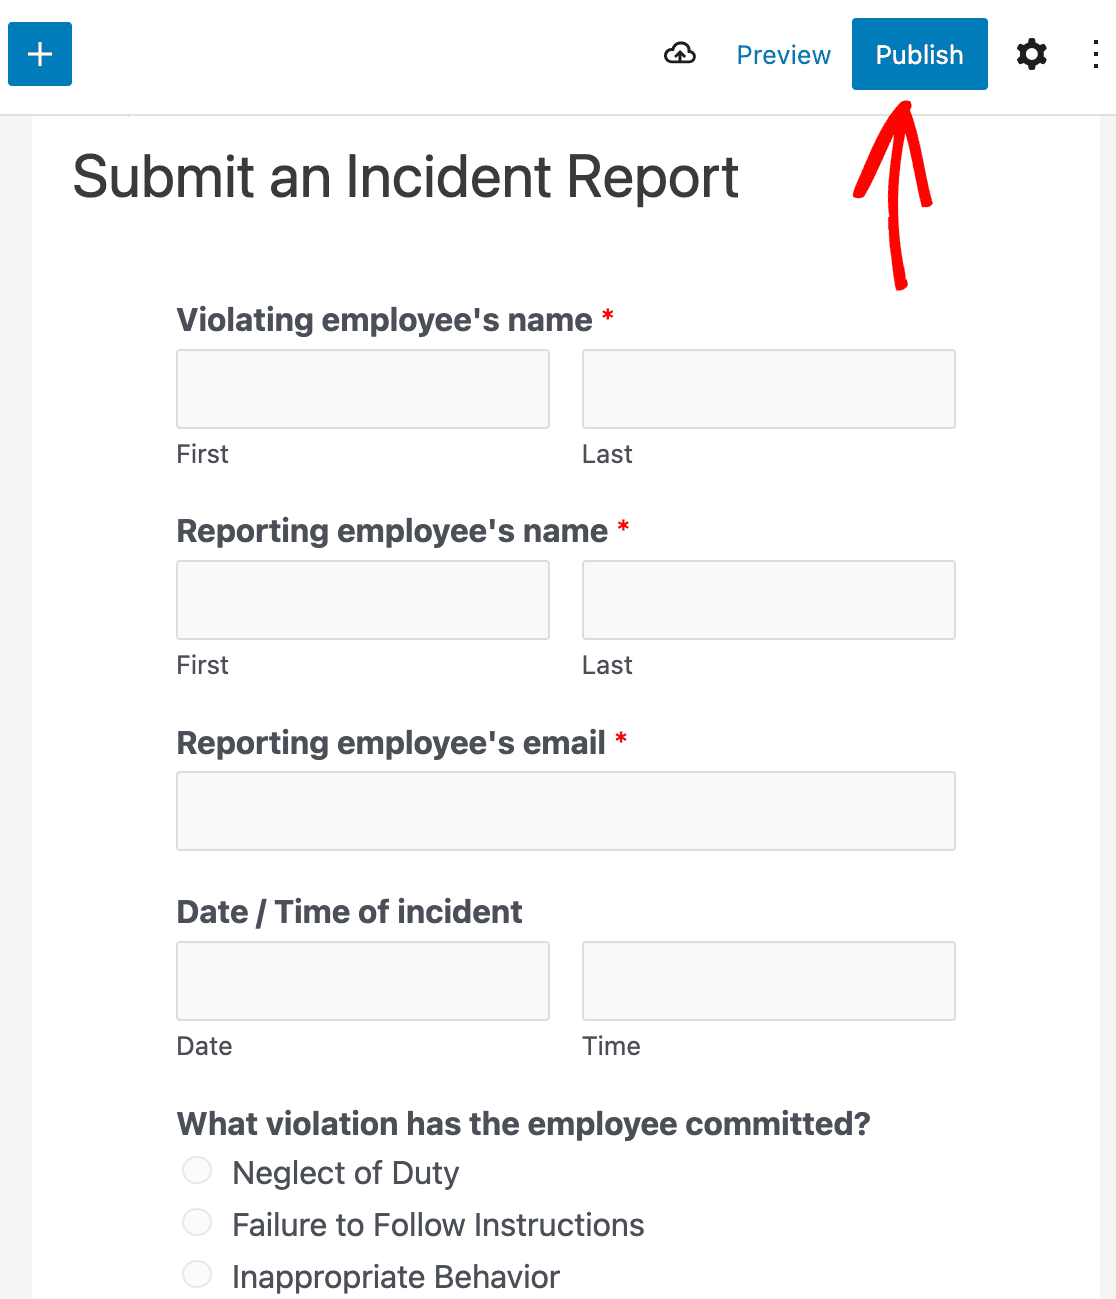 Publishing your incident report form